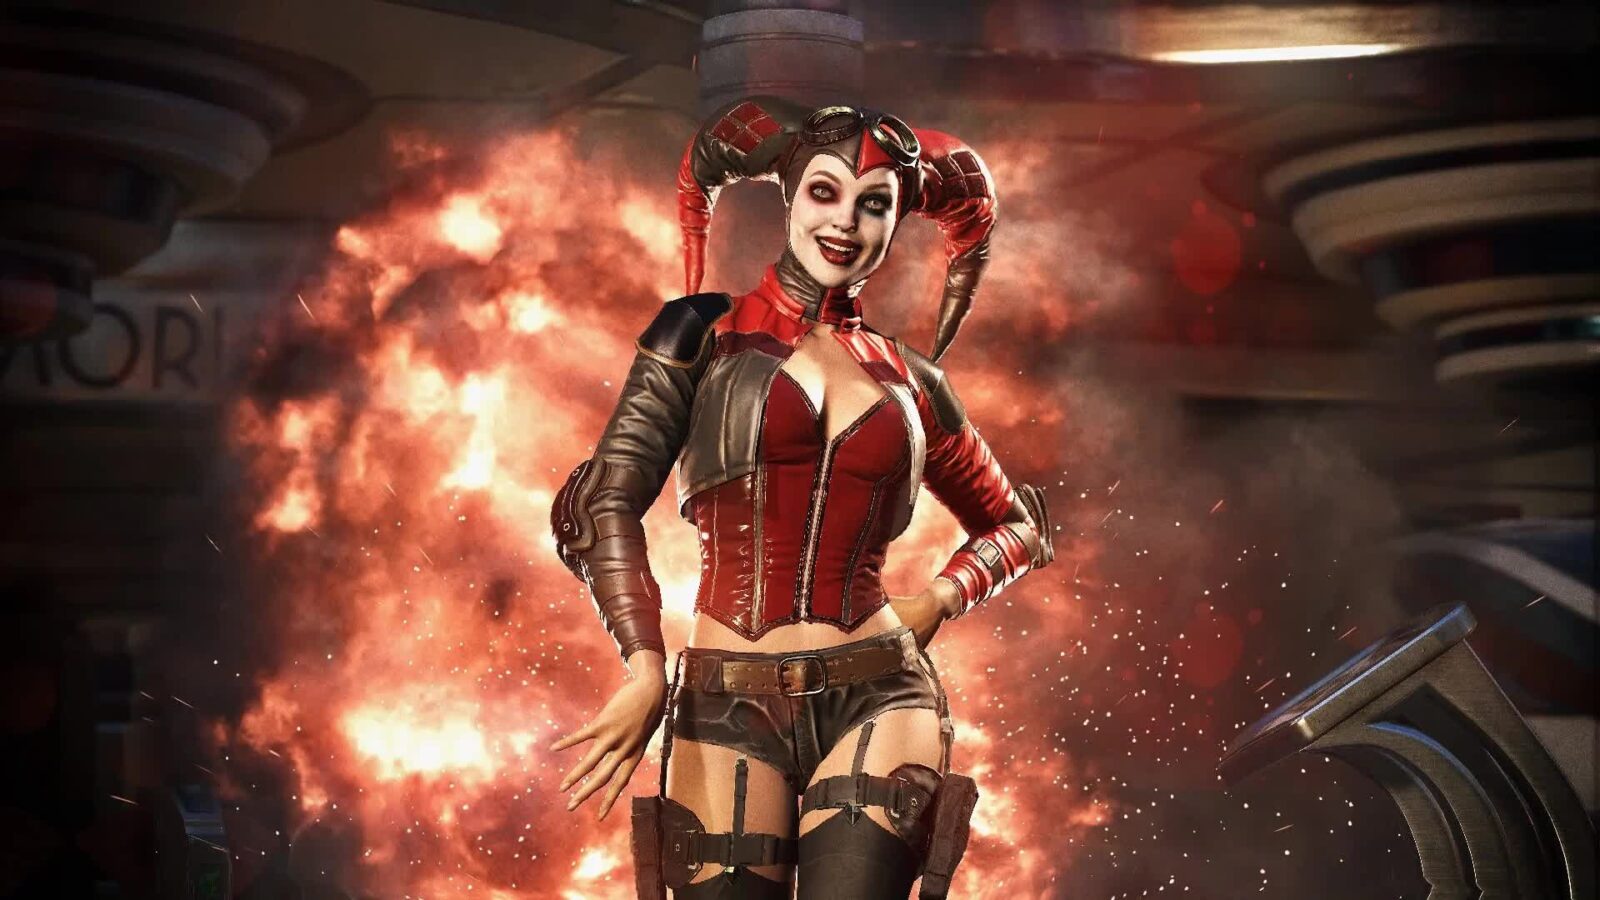 LiveWallpapers4Free.com | Suicide Squad Harley Quinn - Free Live Wallpaper